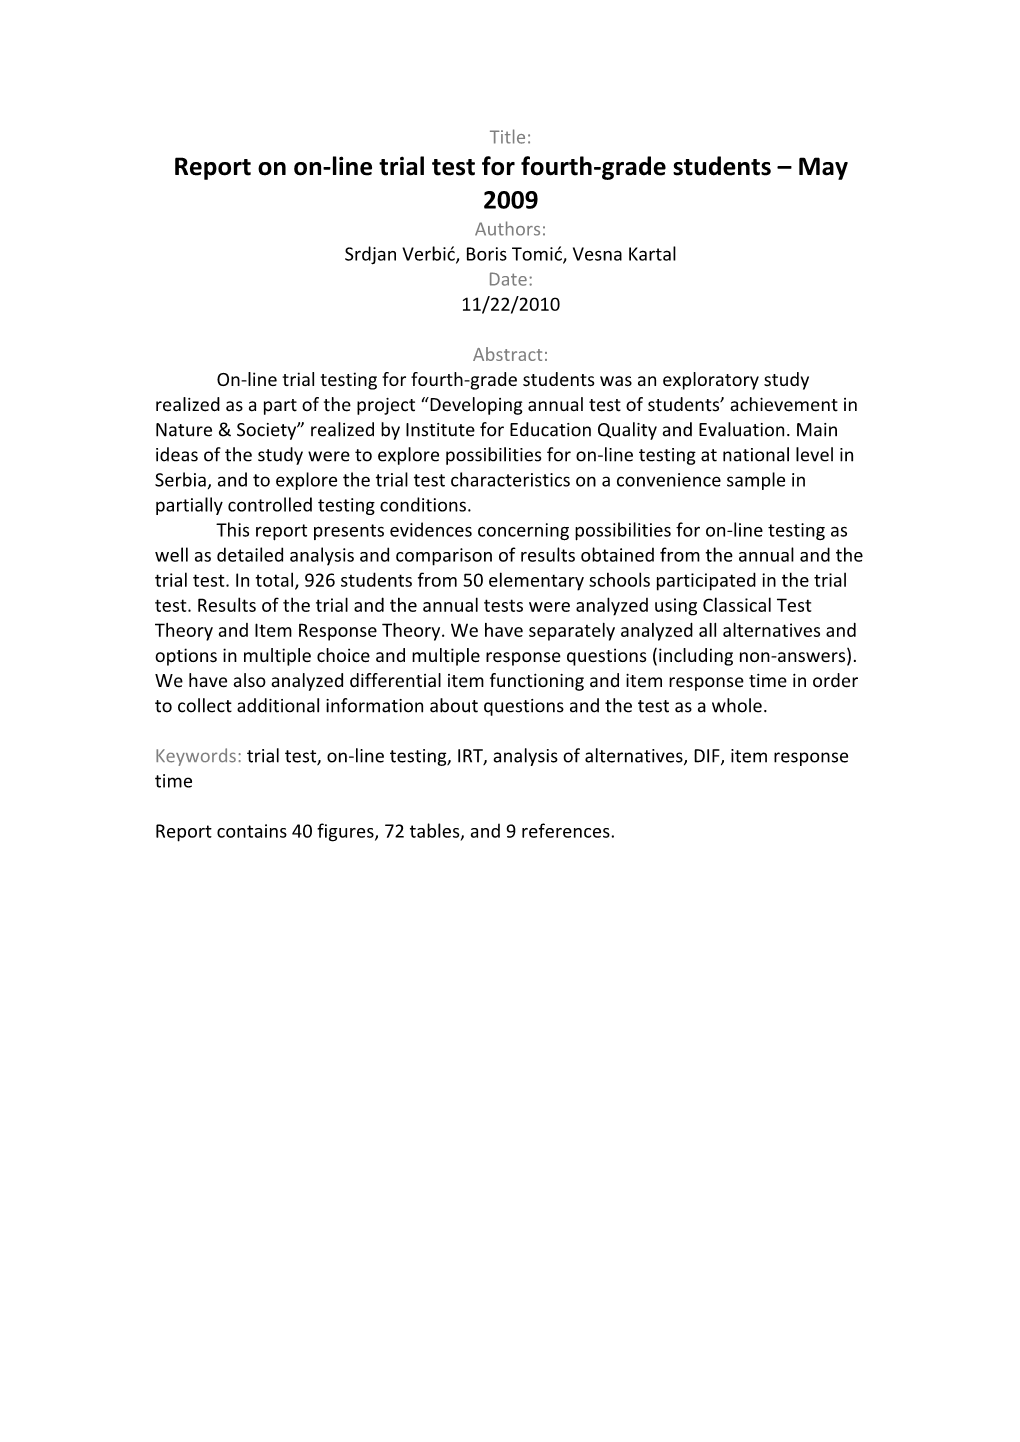 Report on On-Line Trial Test for Fourth-Grade Students – May 2009